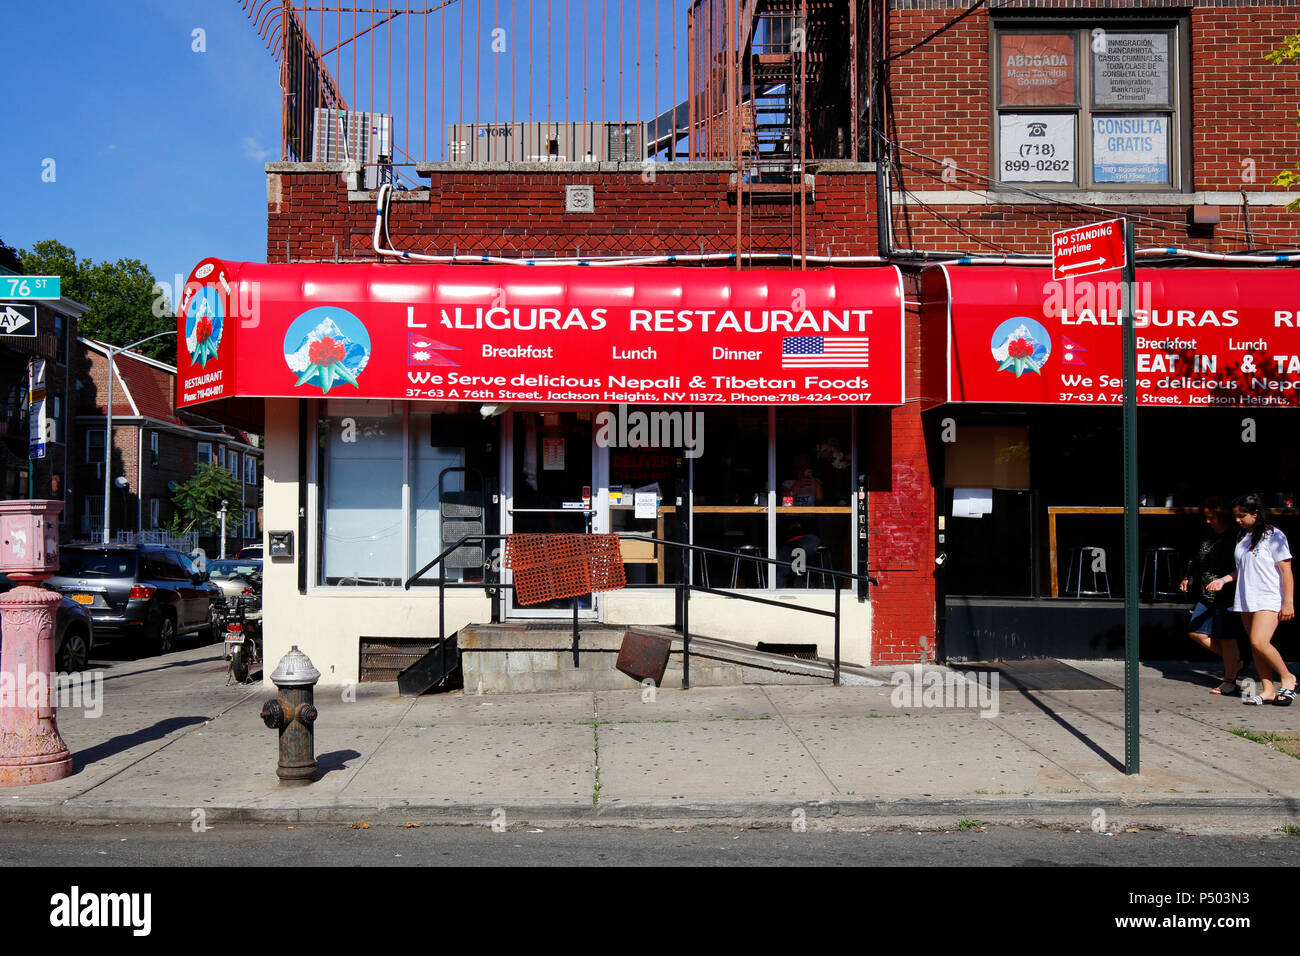 Lali Guras, 37-63 76th St, Queens, New York. NYC storefront photo of a Nepalese restaurant in the Jackson Heights neighborhood. Stock Photo